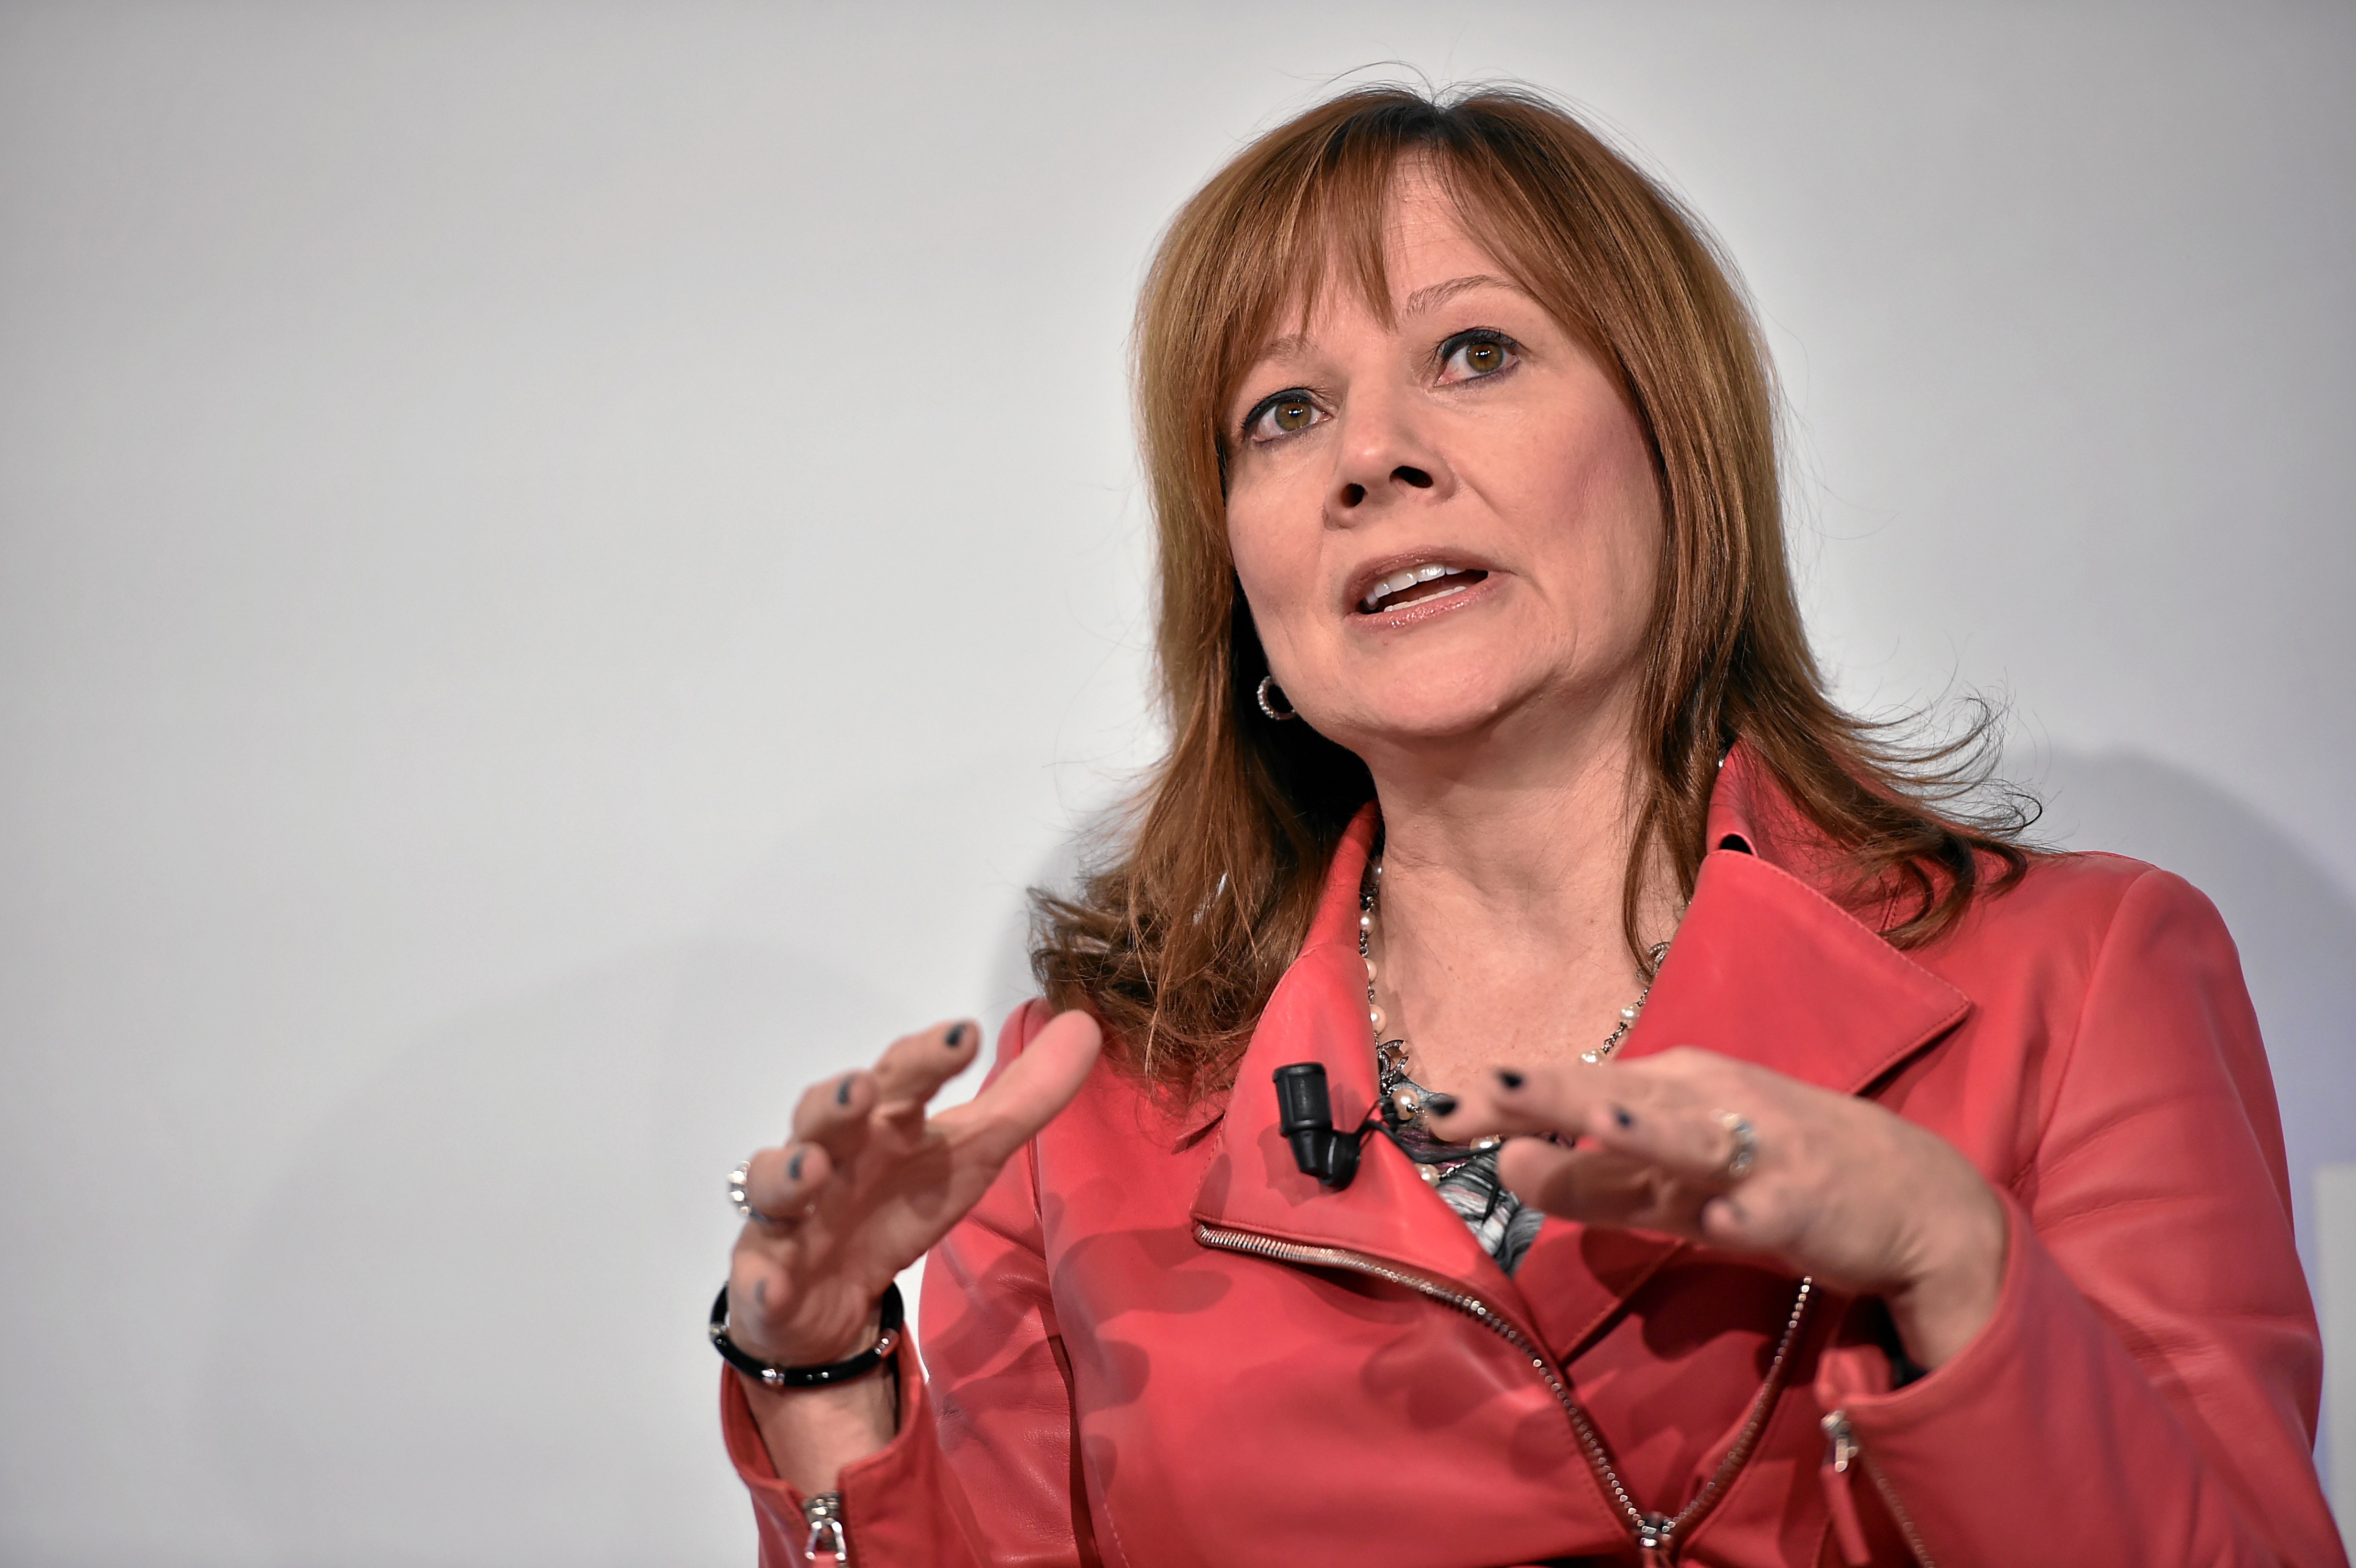 Cruise CEO Dan Ammann Fired By GM's Mary Barra Amid Differences Over IPO Plans, Company Focus: Report